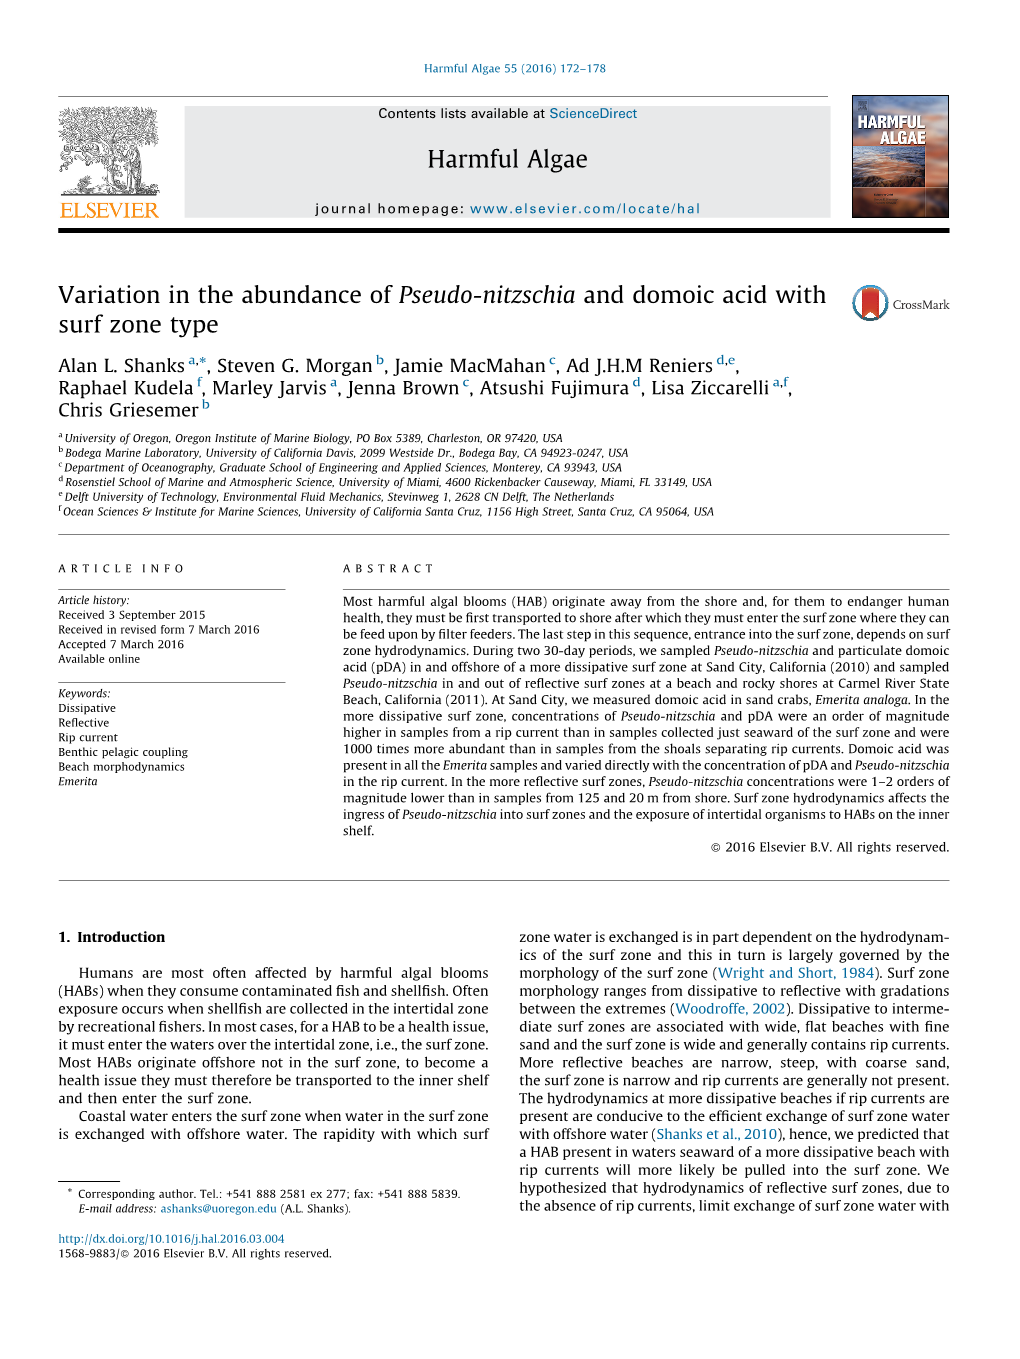 Variation in the Abundance of Pseudo-Nitzschia and Domoic Acid with Surf Zone Type